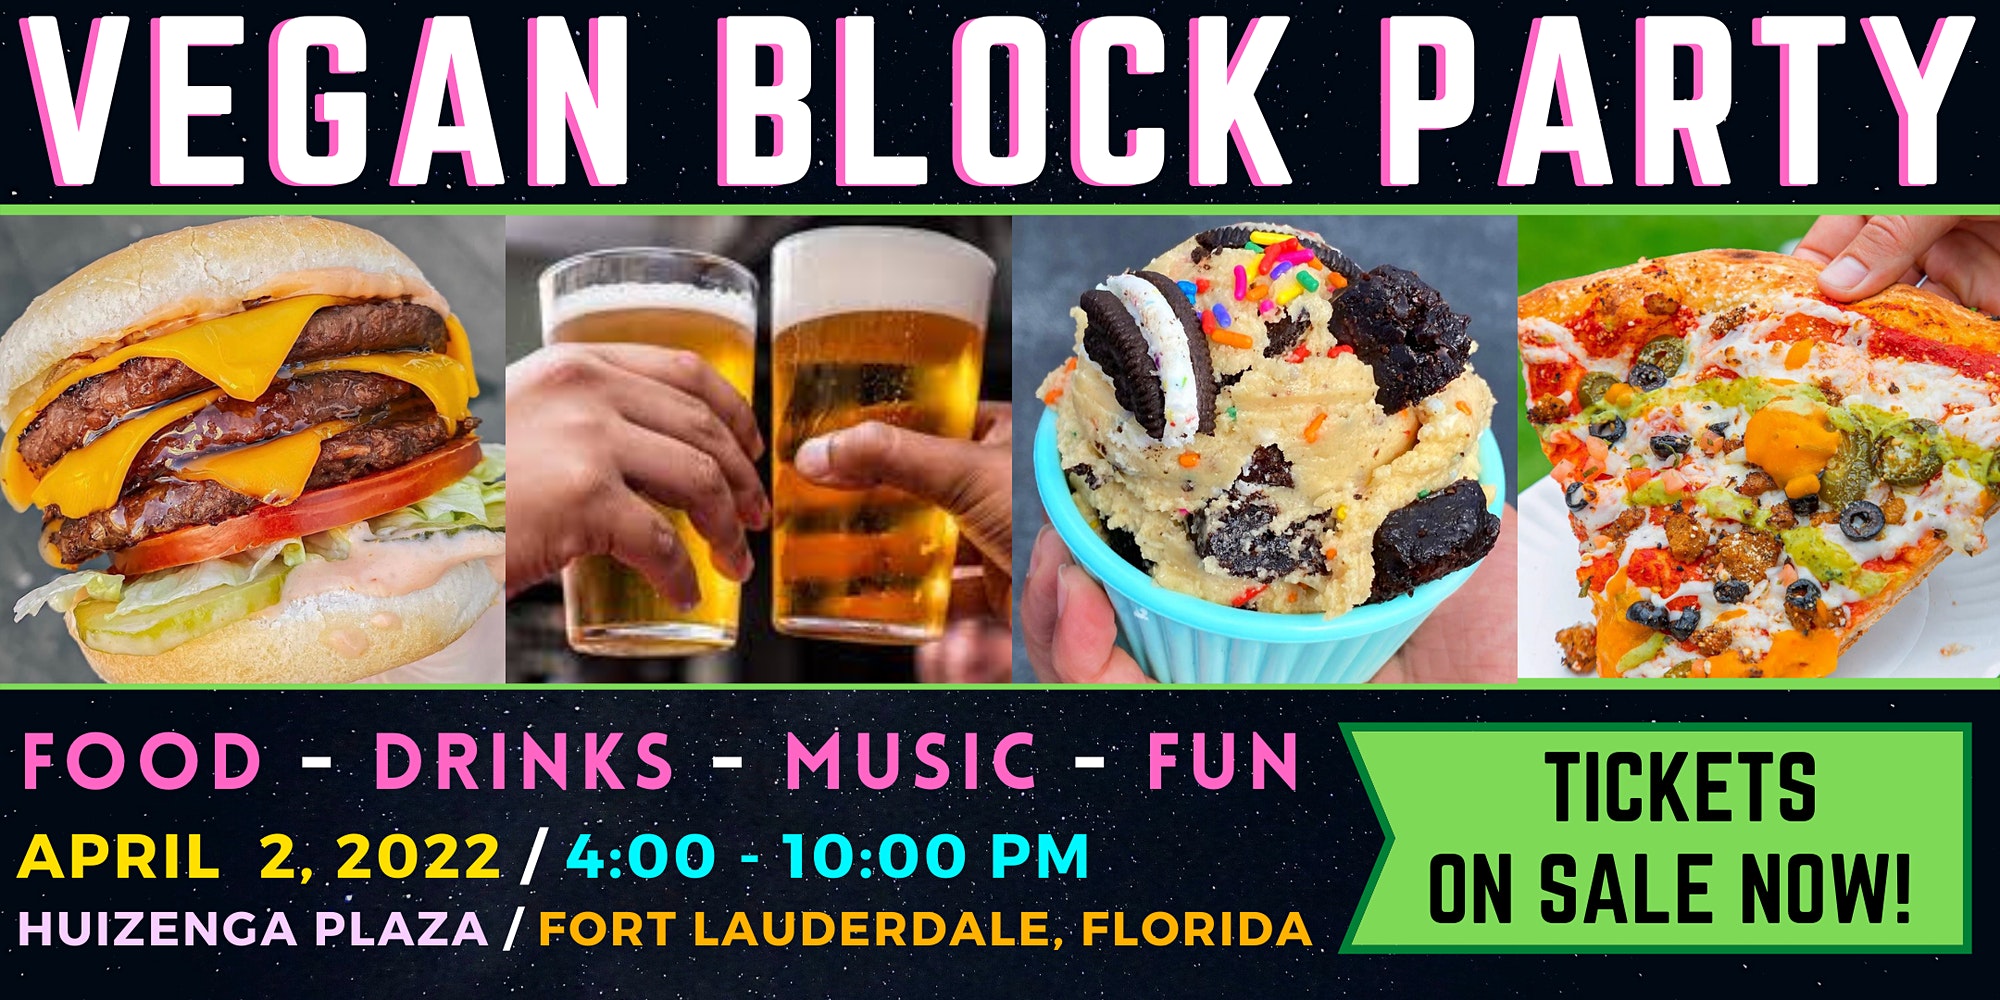 Vegan block party banner with food and drinks